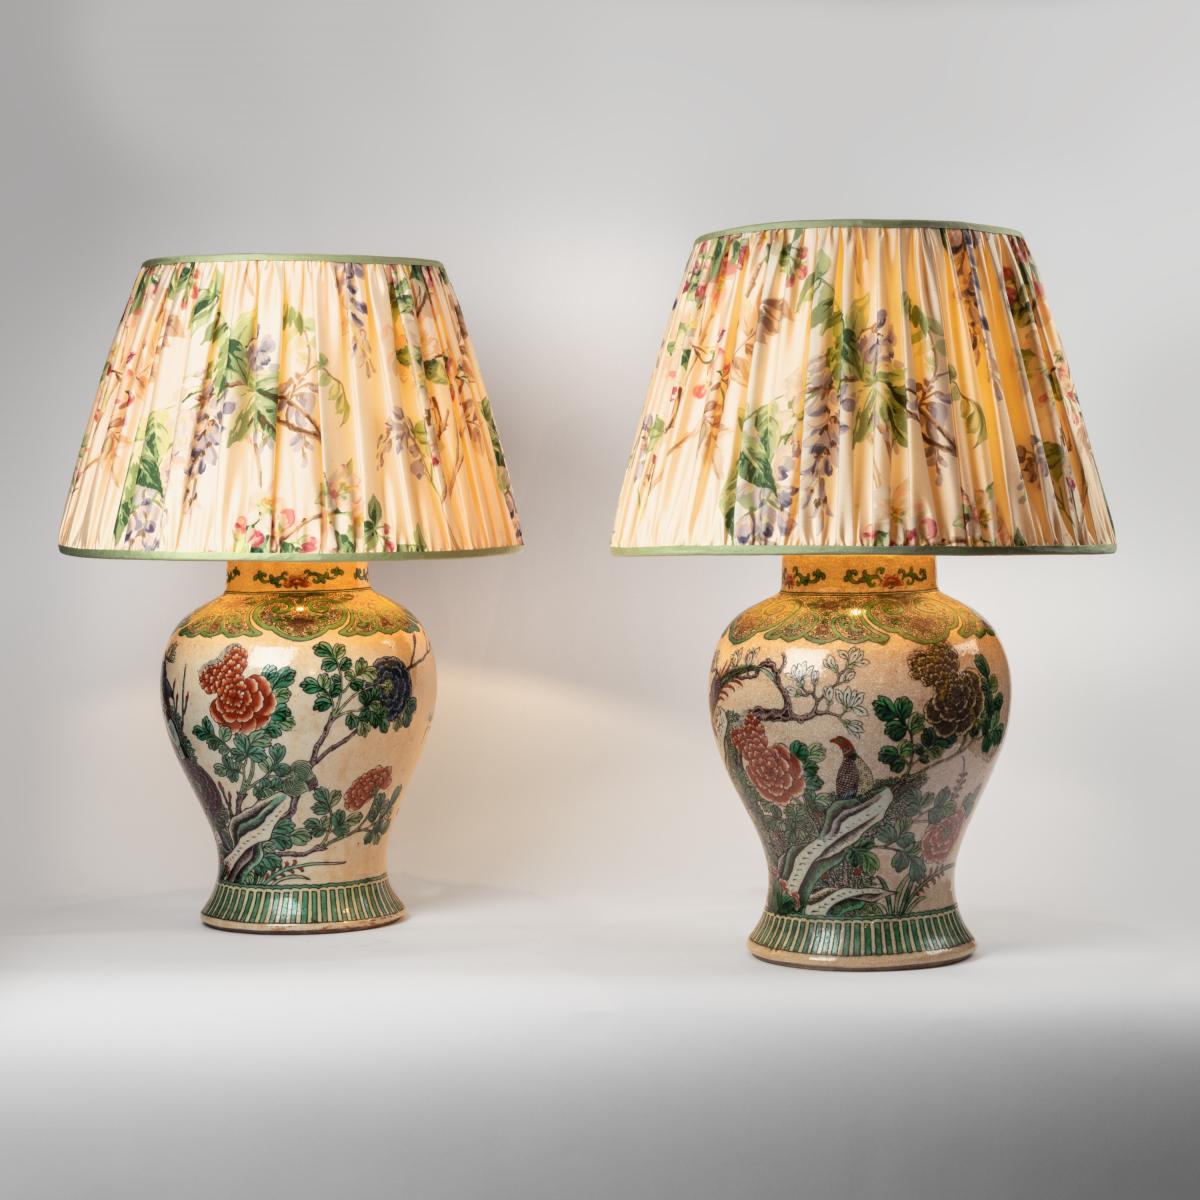 Pair of Chinese table lamps